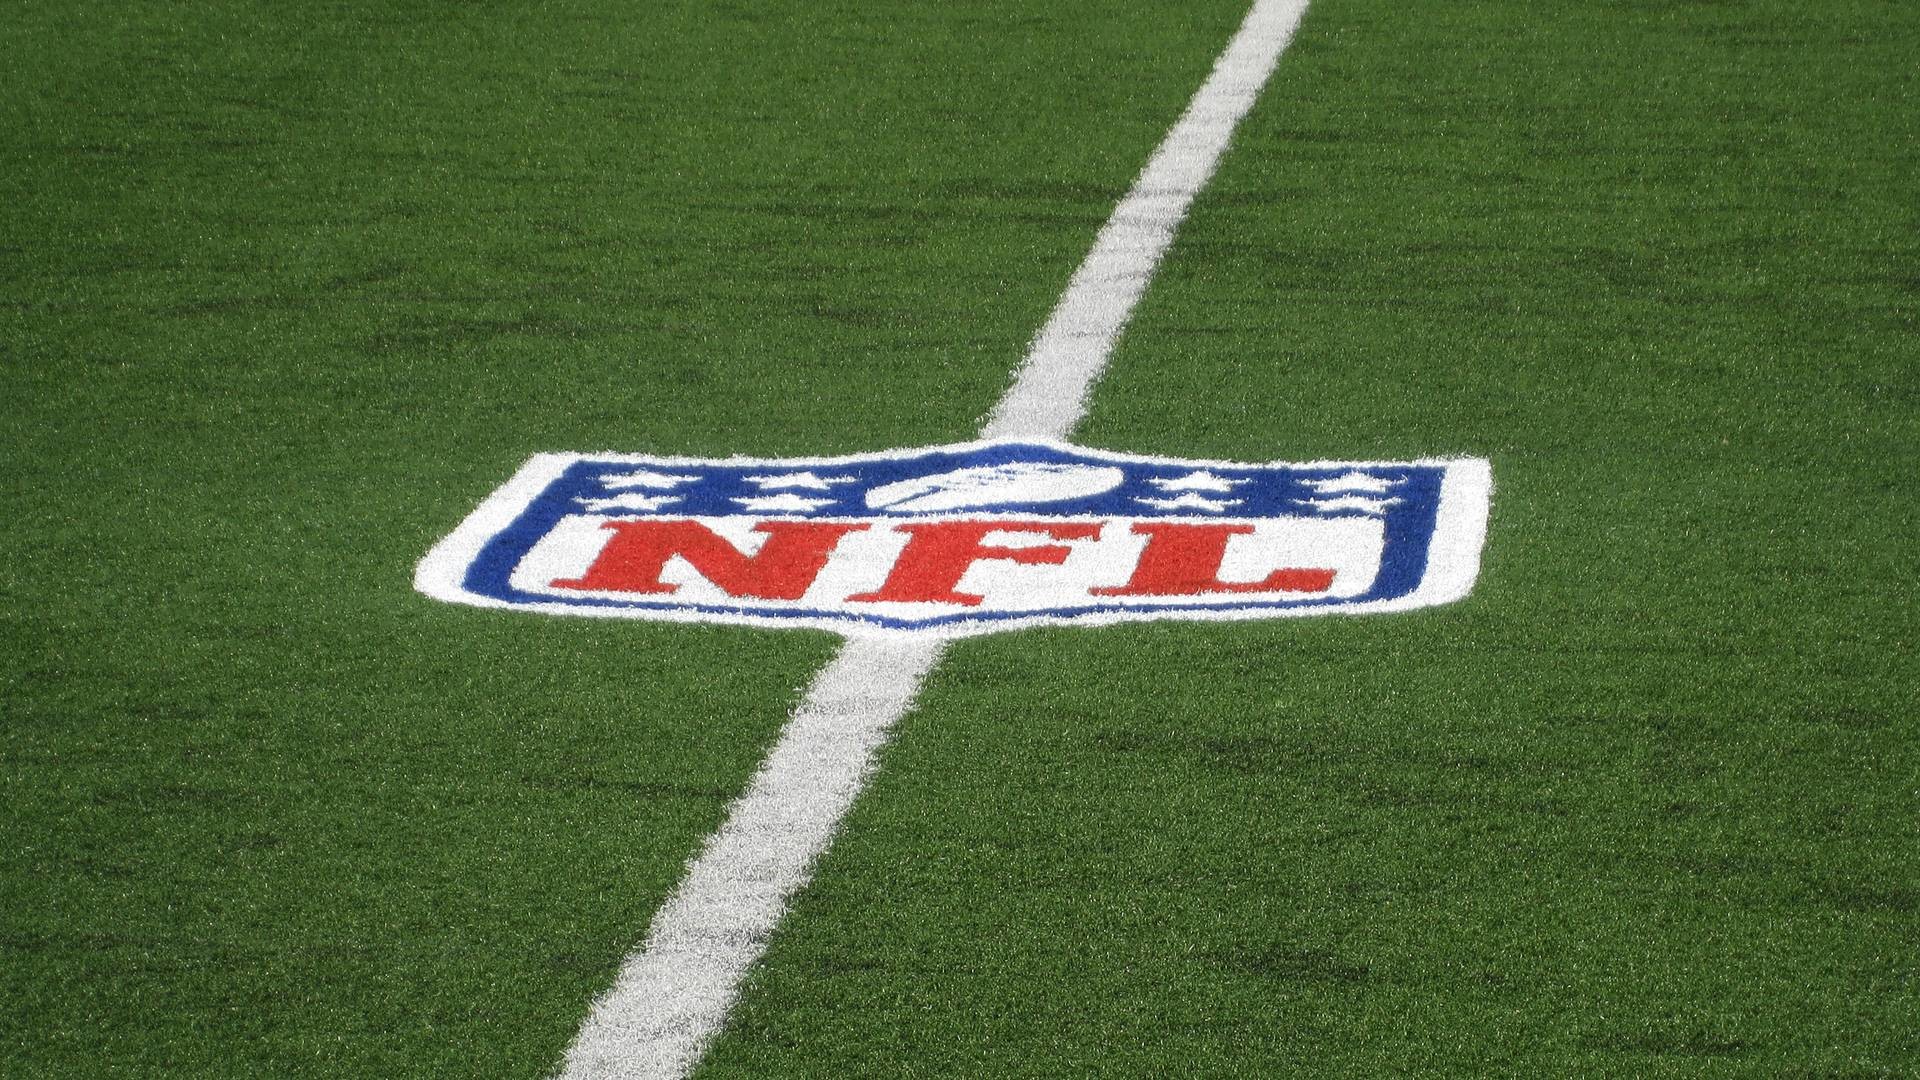 1920x1080 Nfl Football Field Background Hd Images 3 HD Wallpapers